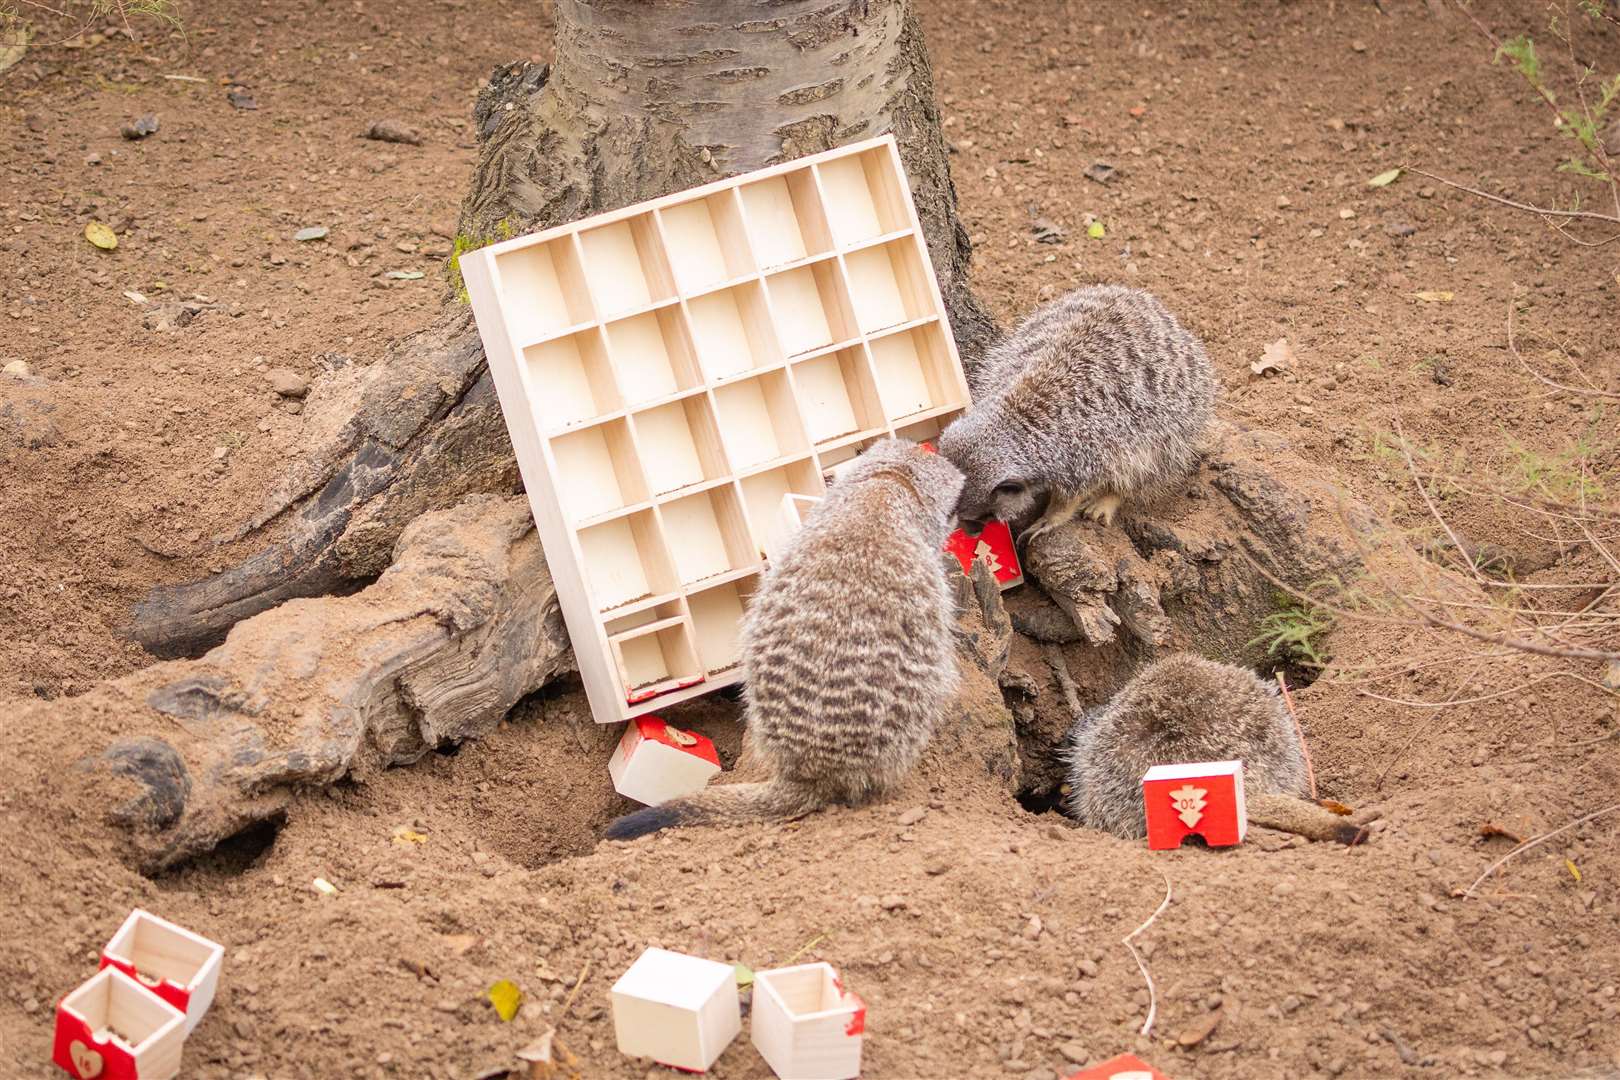 The mischievous mob ignored the tradition of opening only a single door a day and instead tore into their unique gift. (ZSL London Zoo/PA)